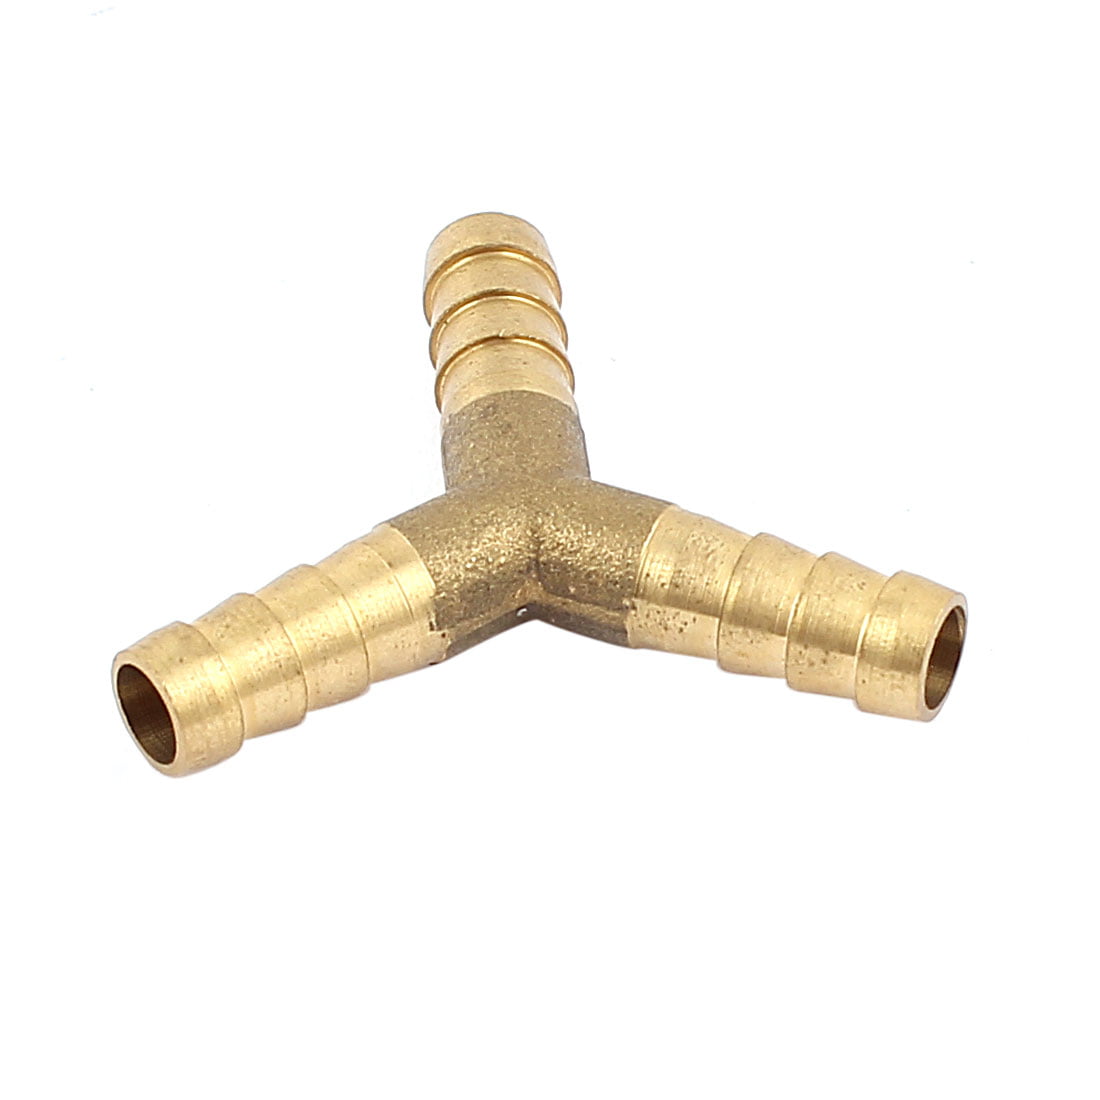 5 Pcs 8mm Dia Y Type Tube Connector Brass Fuel Hose Joiner Fittings 